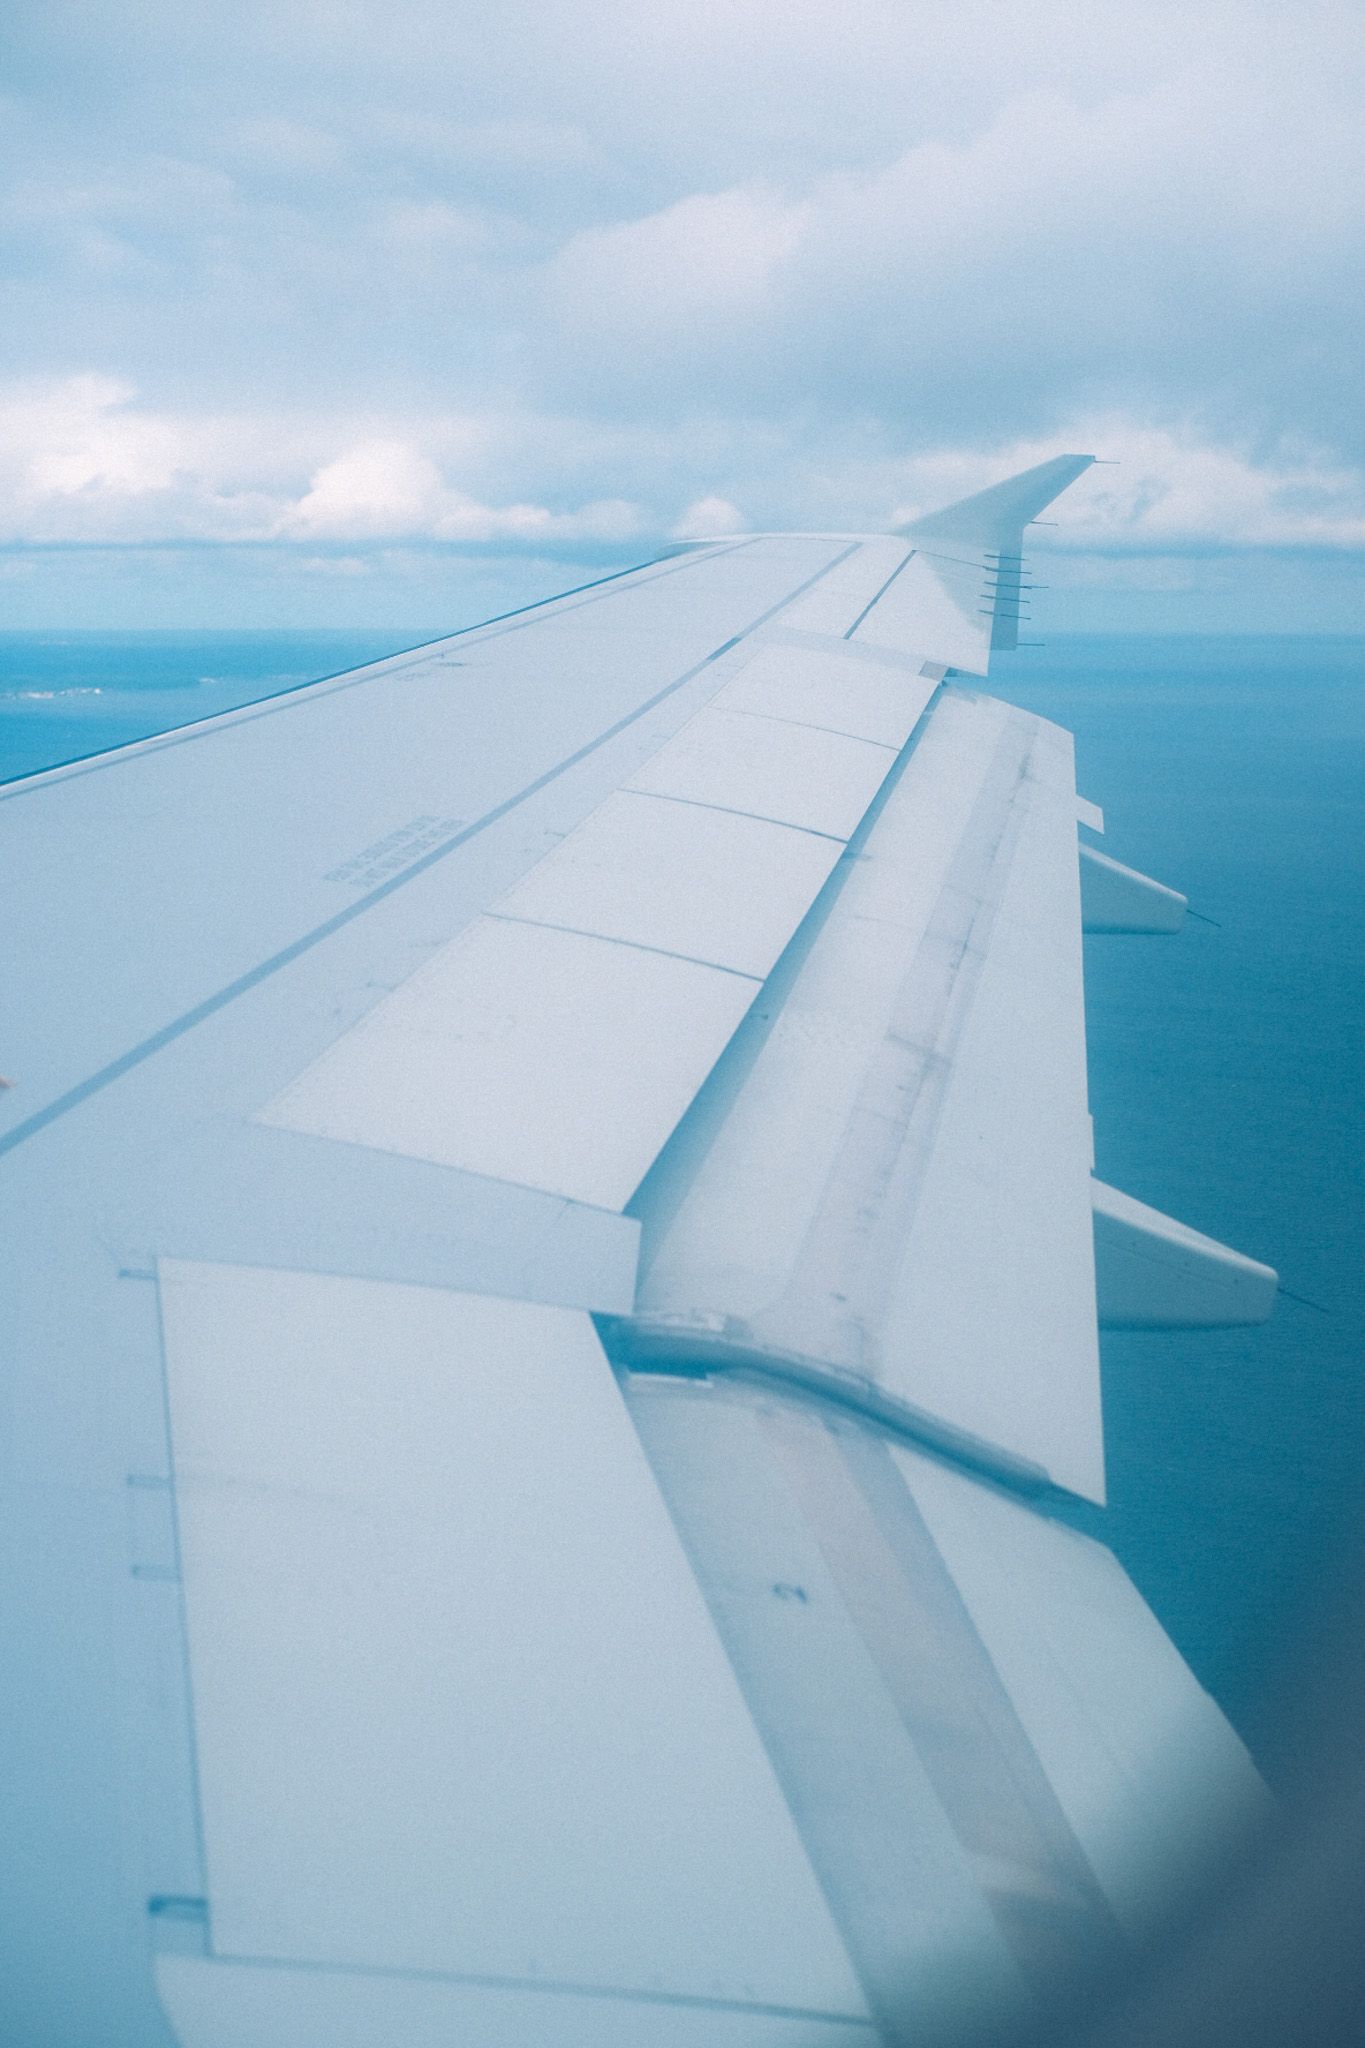 A view of an airplane wing, blue tinted, overlooking land and sea.